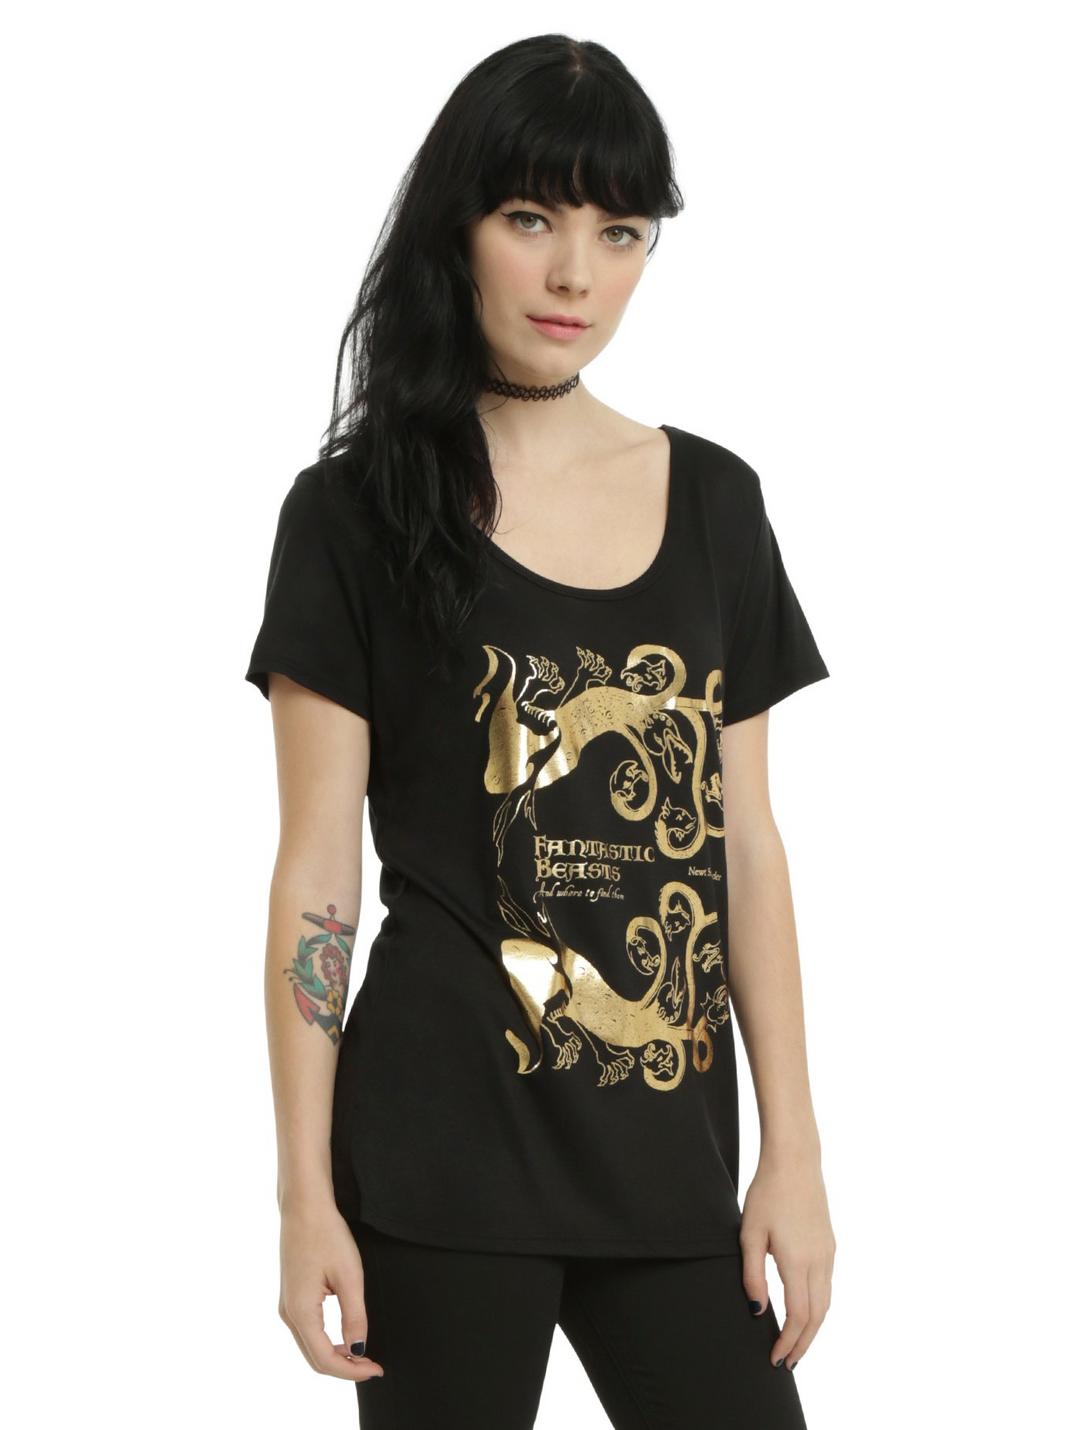 Harry Potter Fantastic Beasts And Where To Find Them Gold Foil Girls T-Shirt, GREY, hi-res